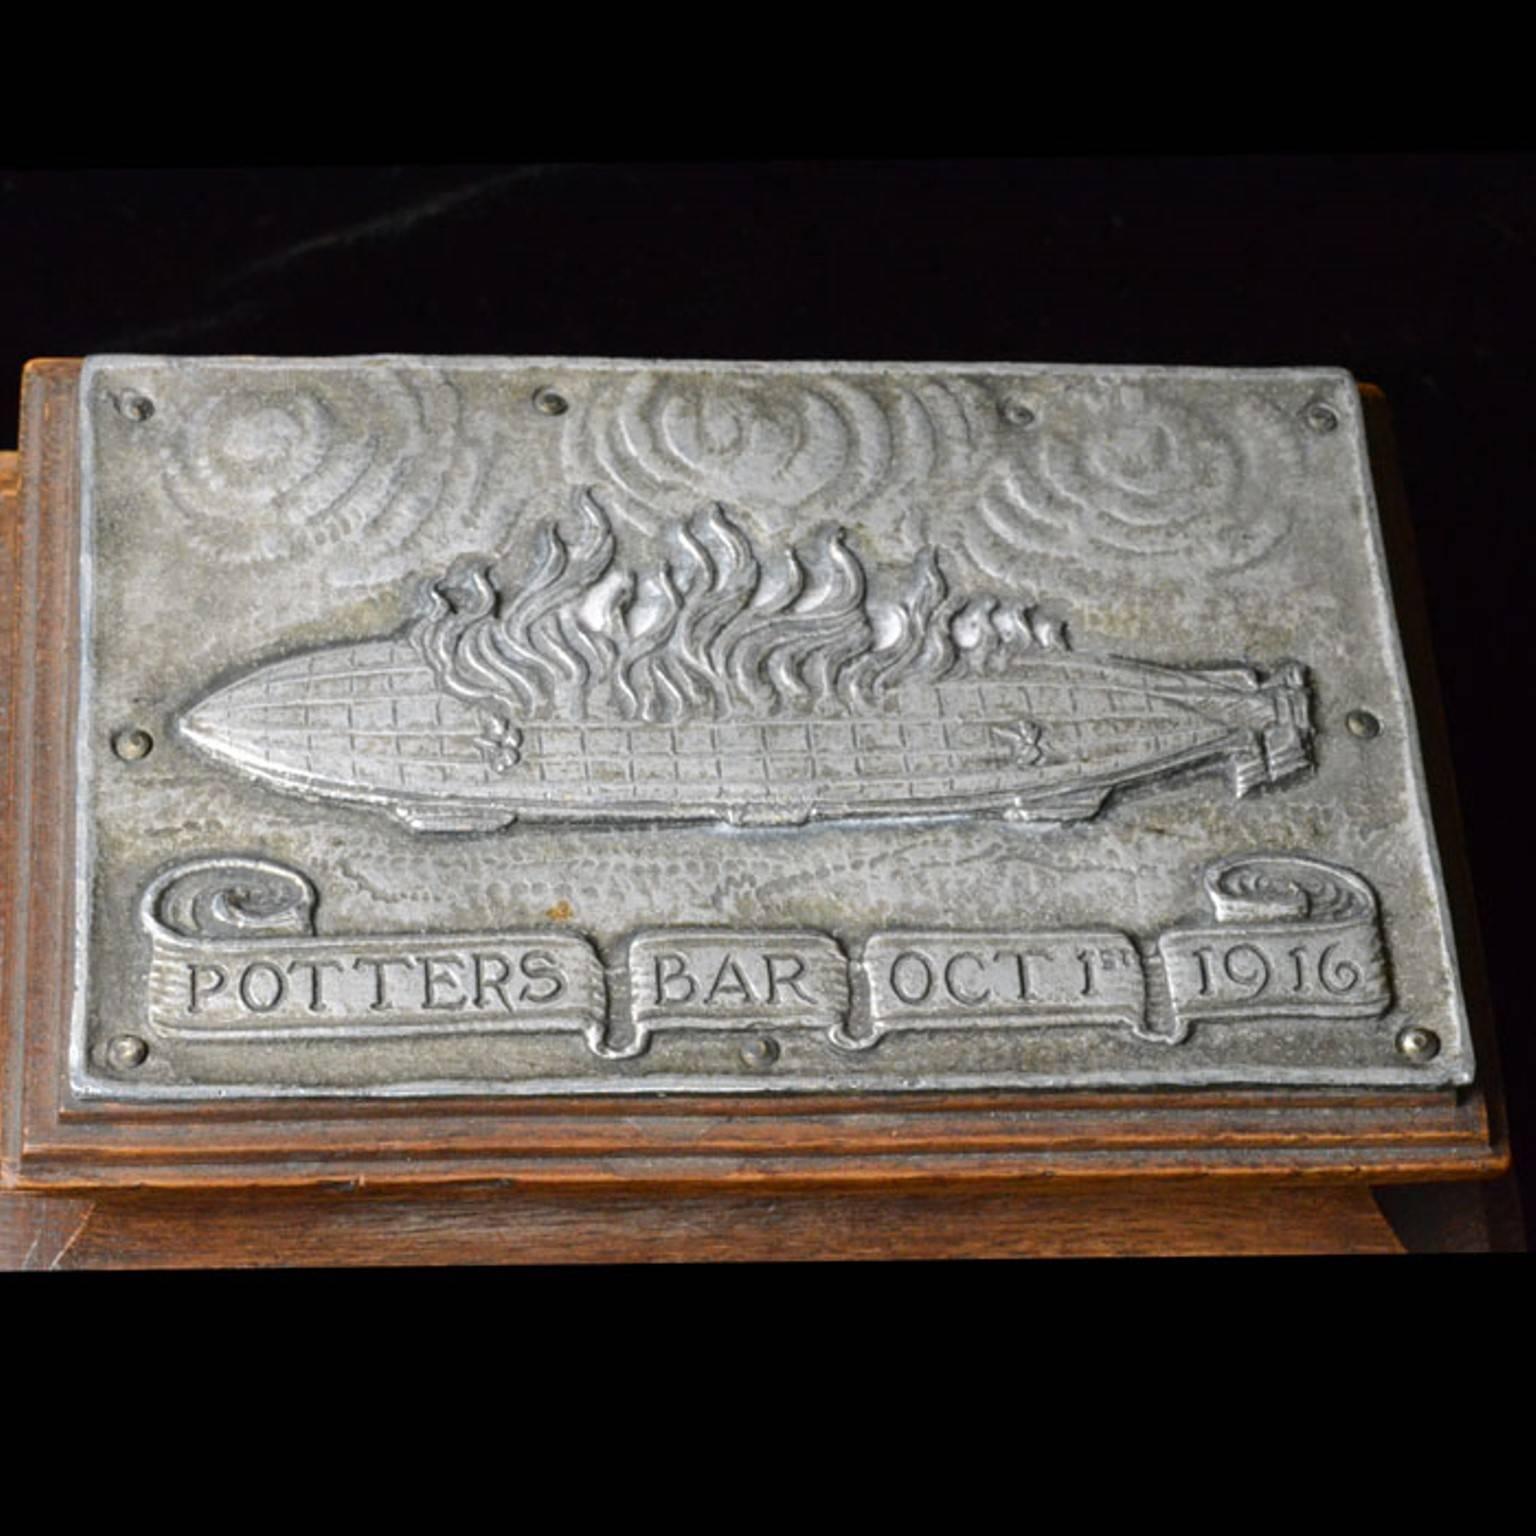 Rectangular form, the metal is from the zeppelin, the oak is from the tree the zeppelin hit commemorating the Potters Bar zeppelin disaster of October 1916

Omar Ramsden & Alwyn Carr

Length 12cm

1072 grams